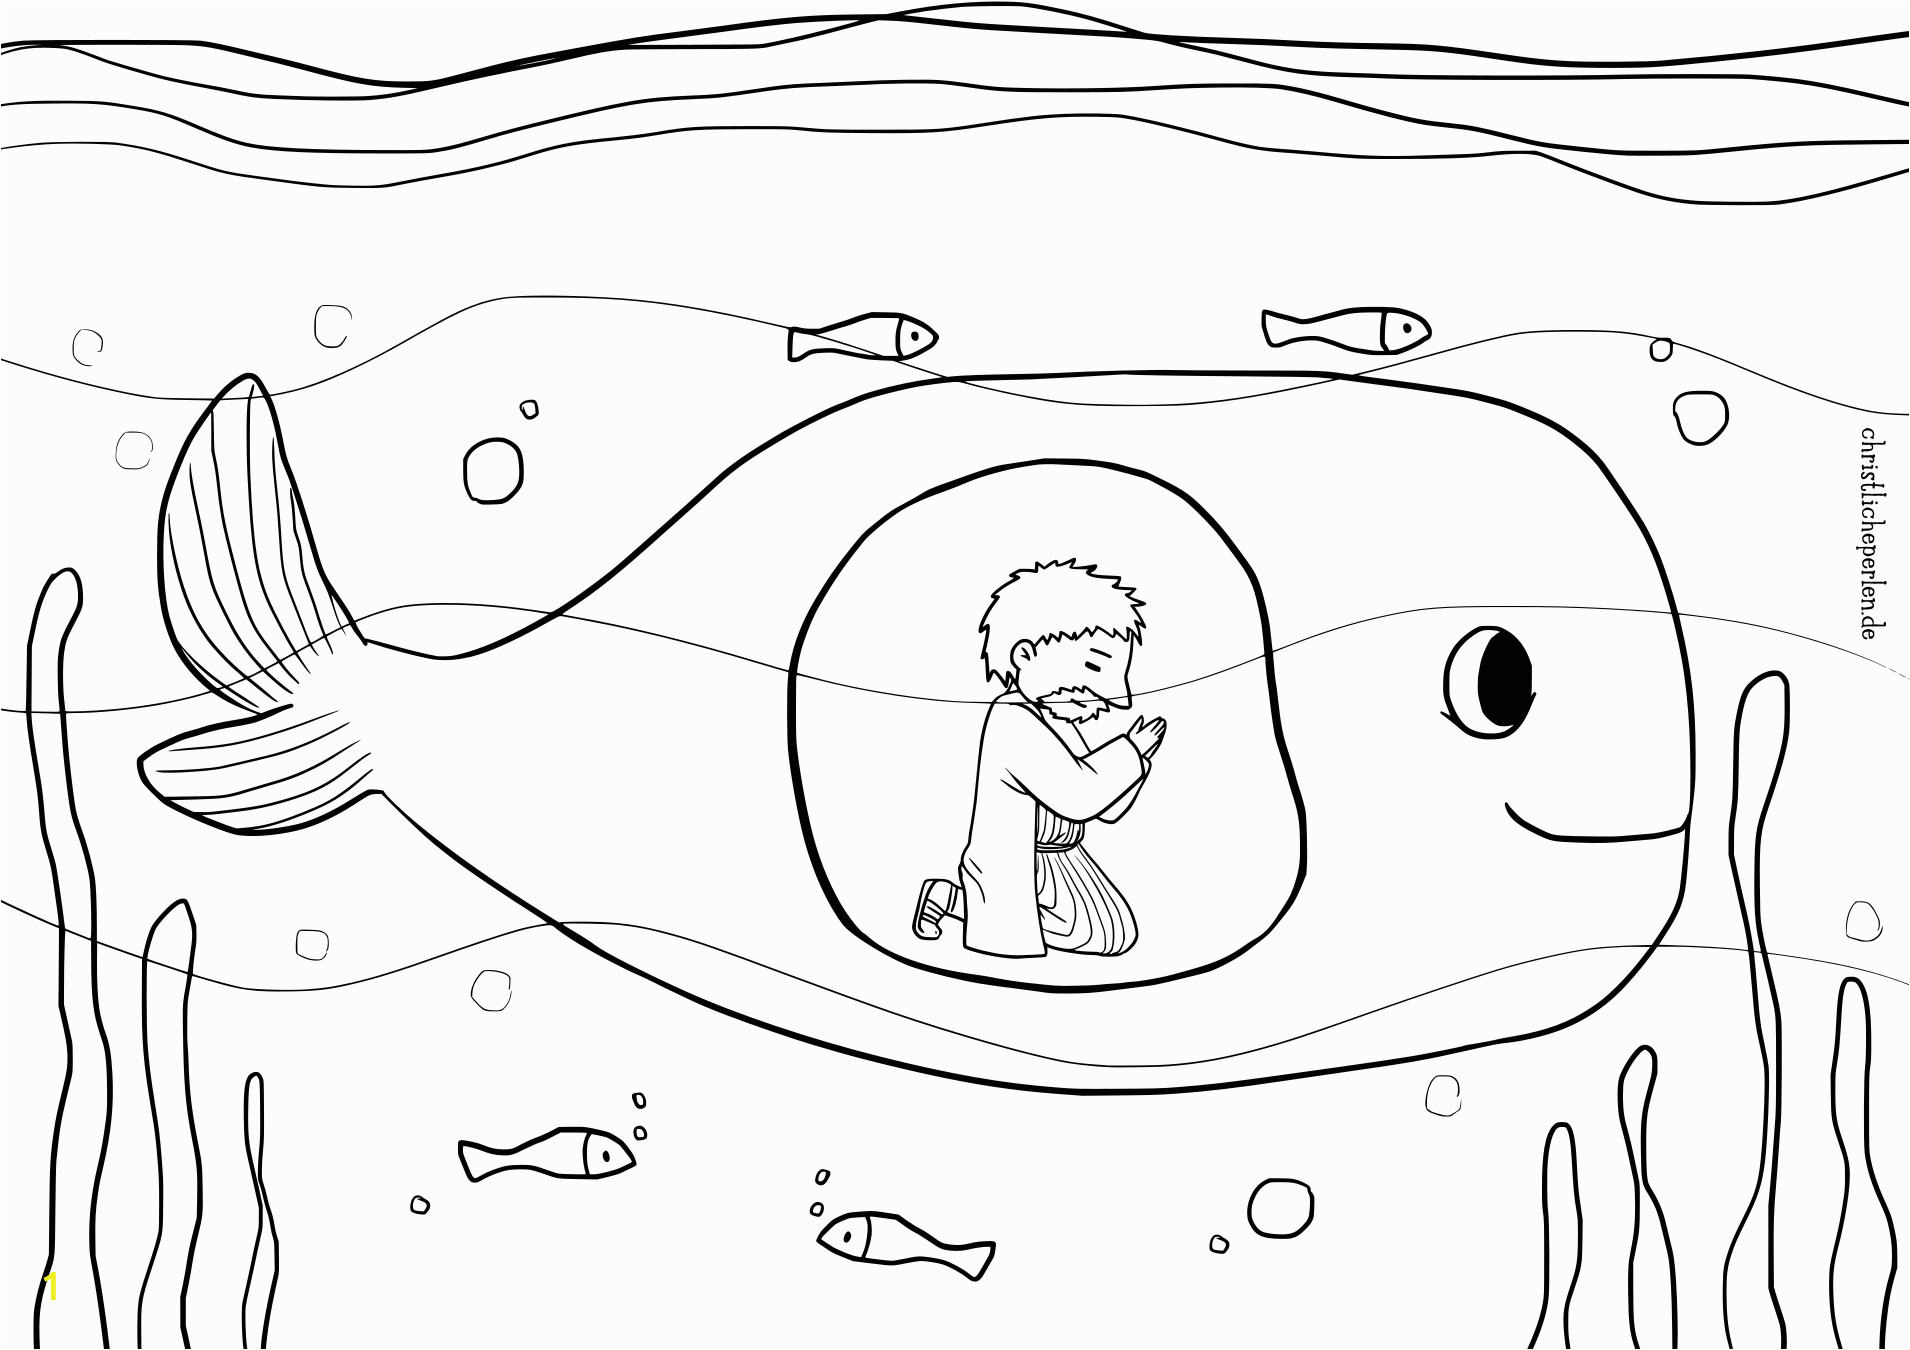 Jonah and the Whale Coloring Page Excellent Picture Of Jonah and the Whale Coloring Pages